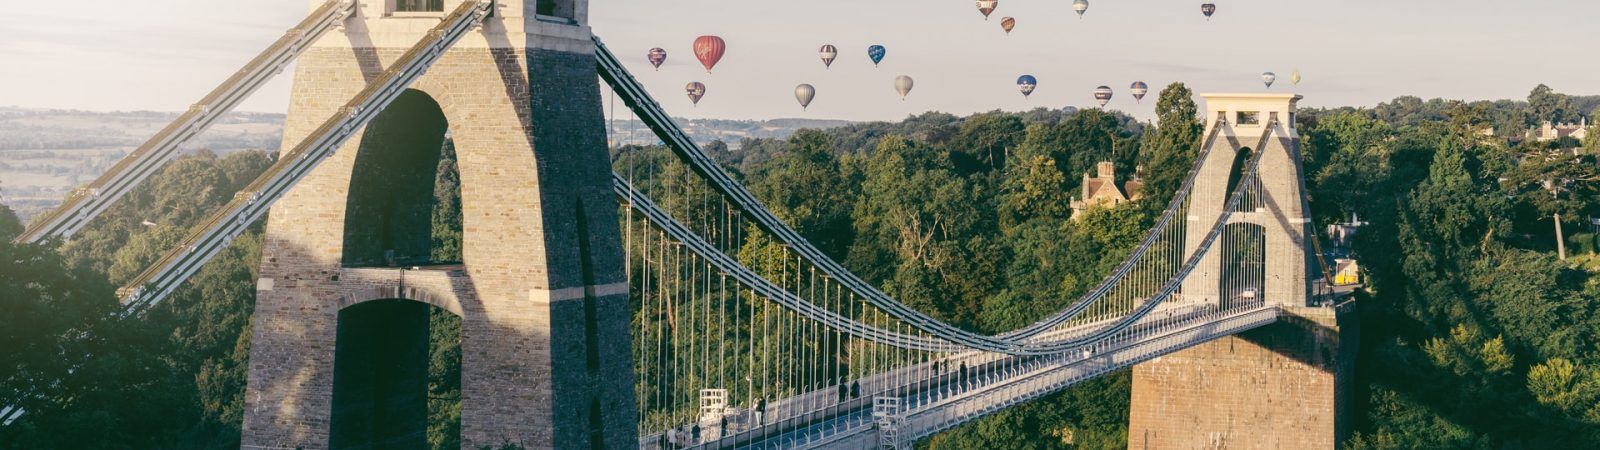 Berwick Lodge Boutique Hotel Bristol | 72 HOURS IN BRISTOL - Things to do in Bristol